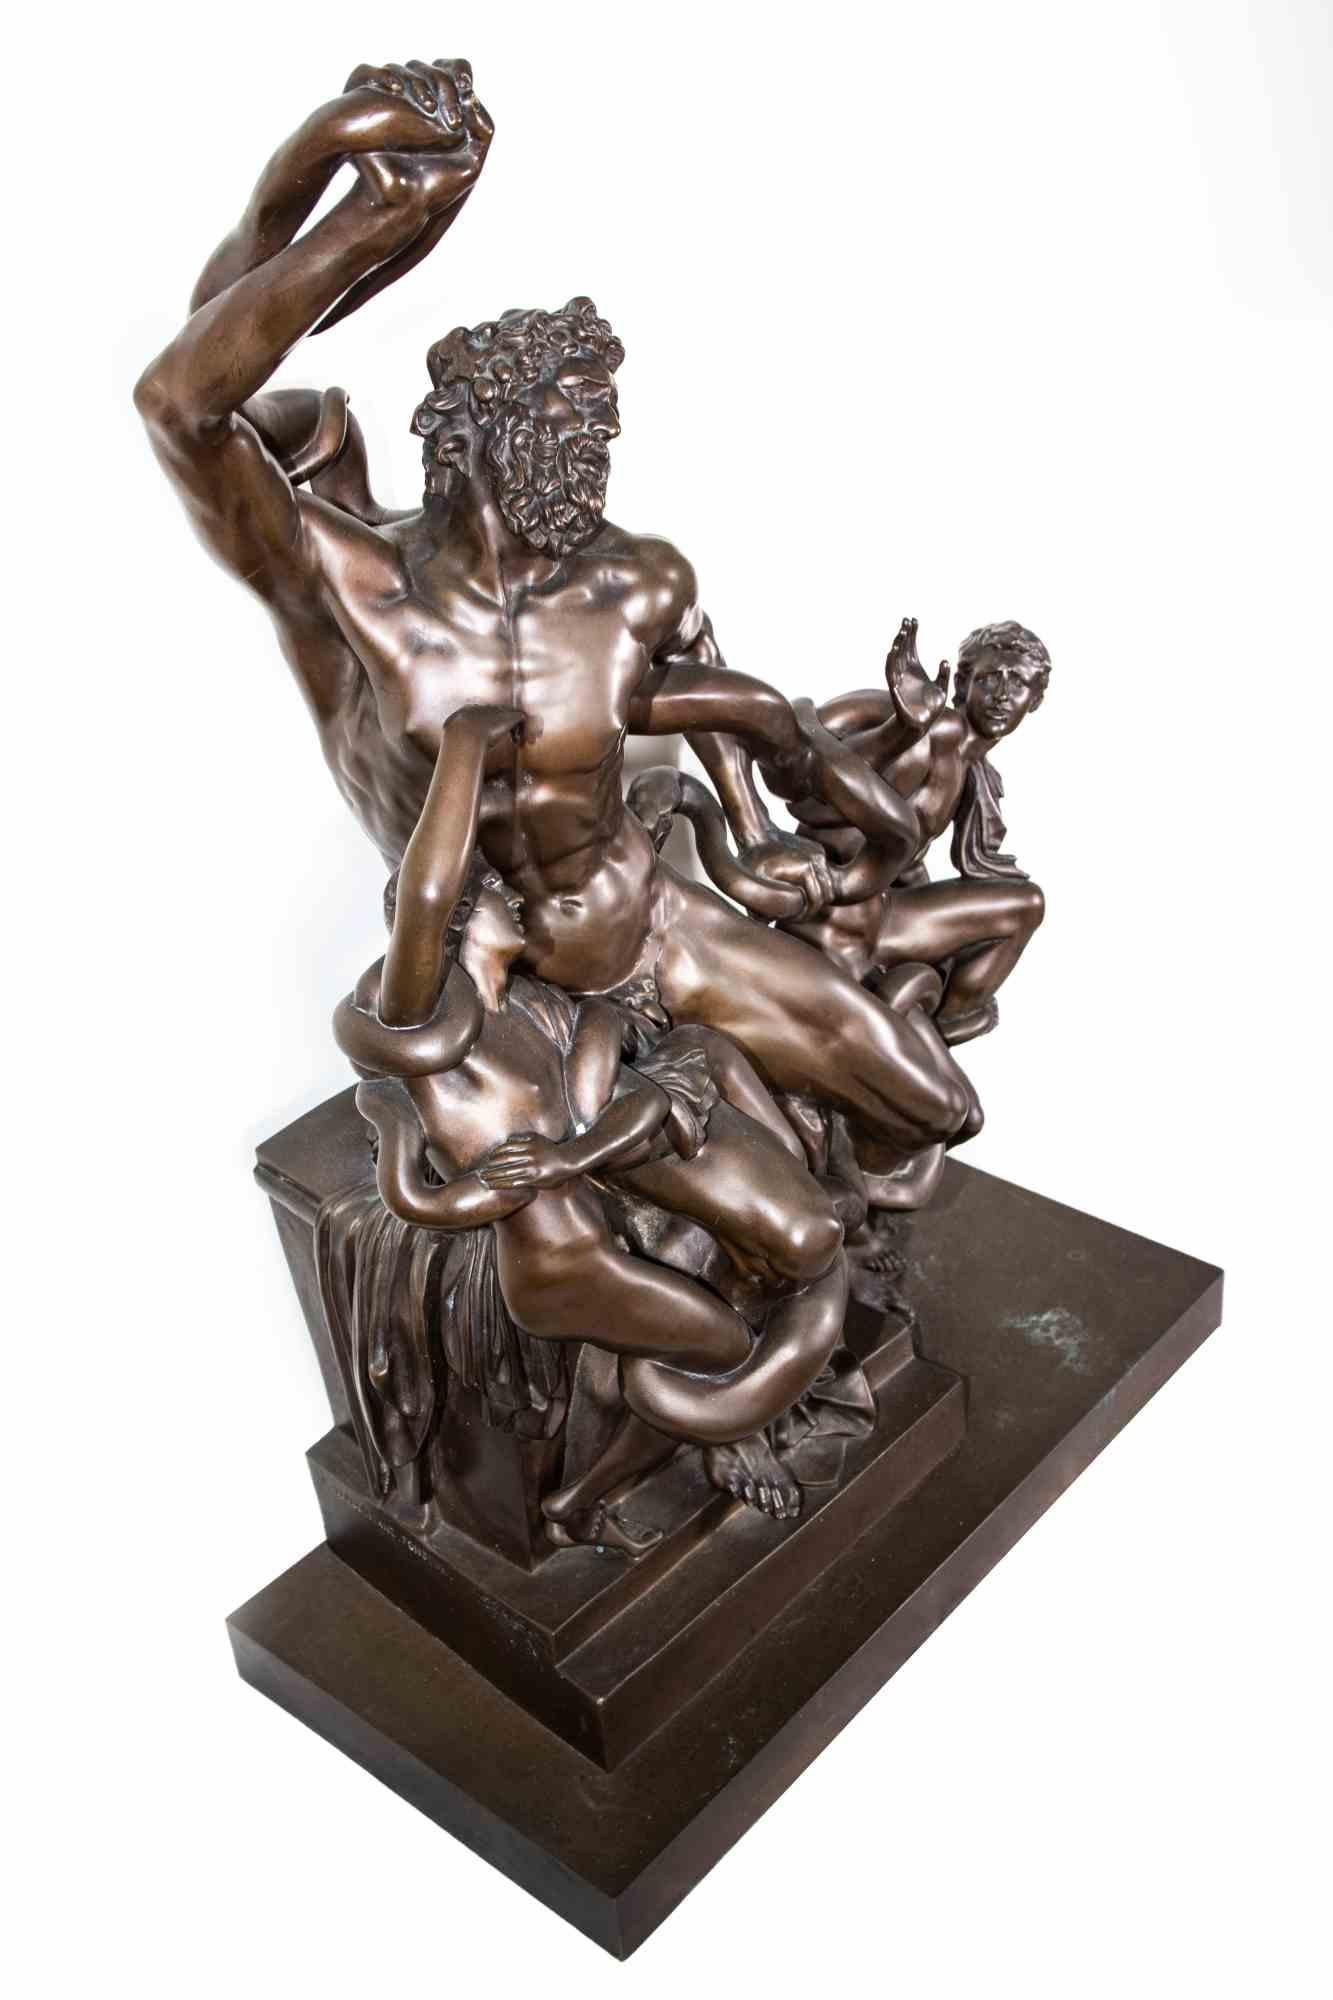 Laocoon Group - Bronze Sculpture by F. Barbedienne - 19th Century - Gold Figurative Sculpture by Ferdinand Barbedienne